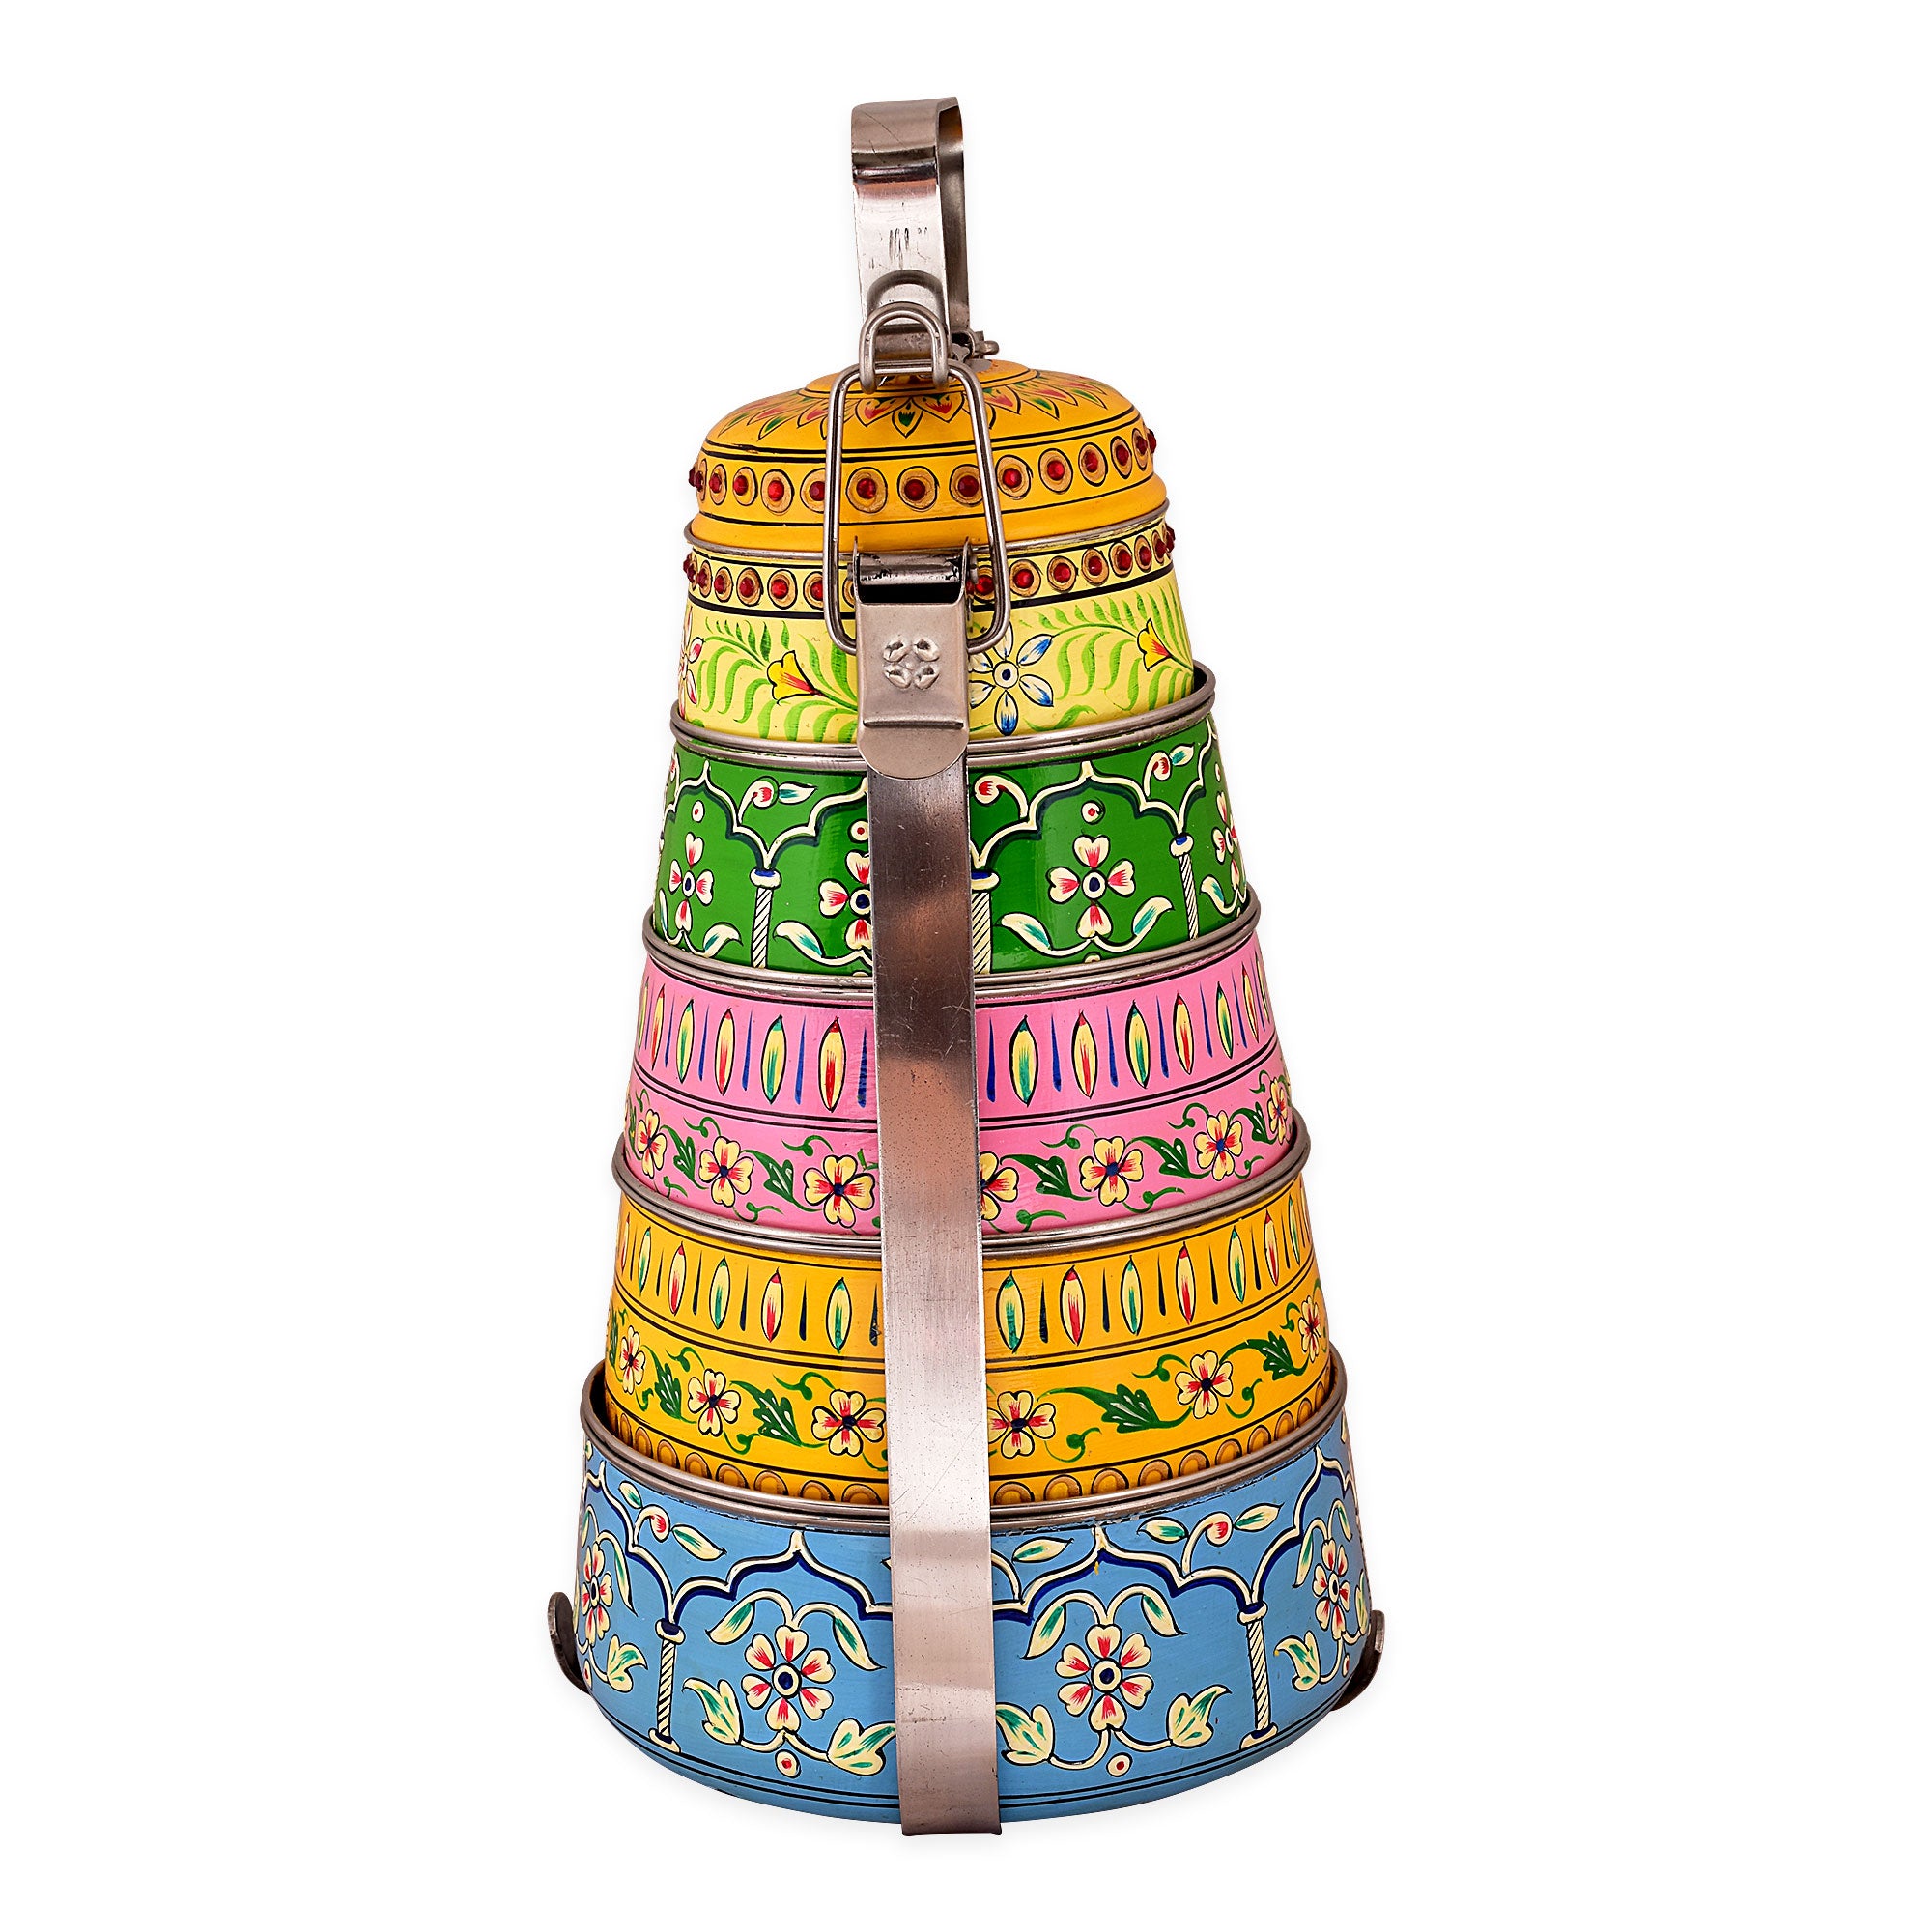 Kaushalam hand painted 5 tier steel pyramid tiffin- Pink city, Lunch box, Meal for family, Picnic box, large Bento box, Christmas gift, reusable tiffin